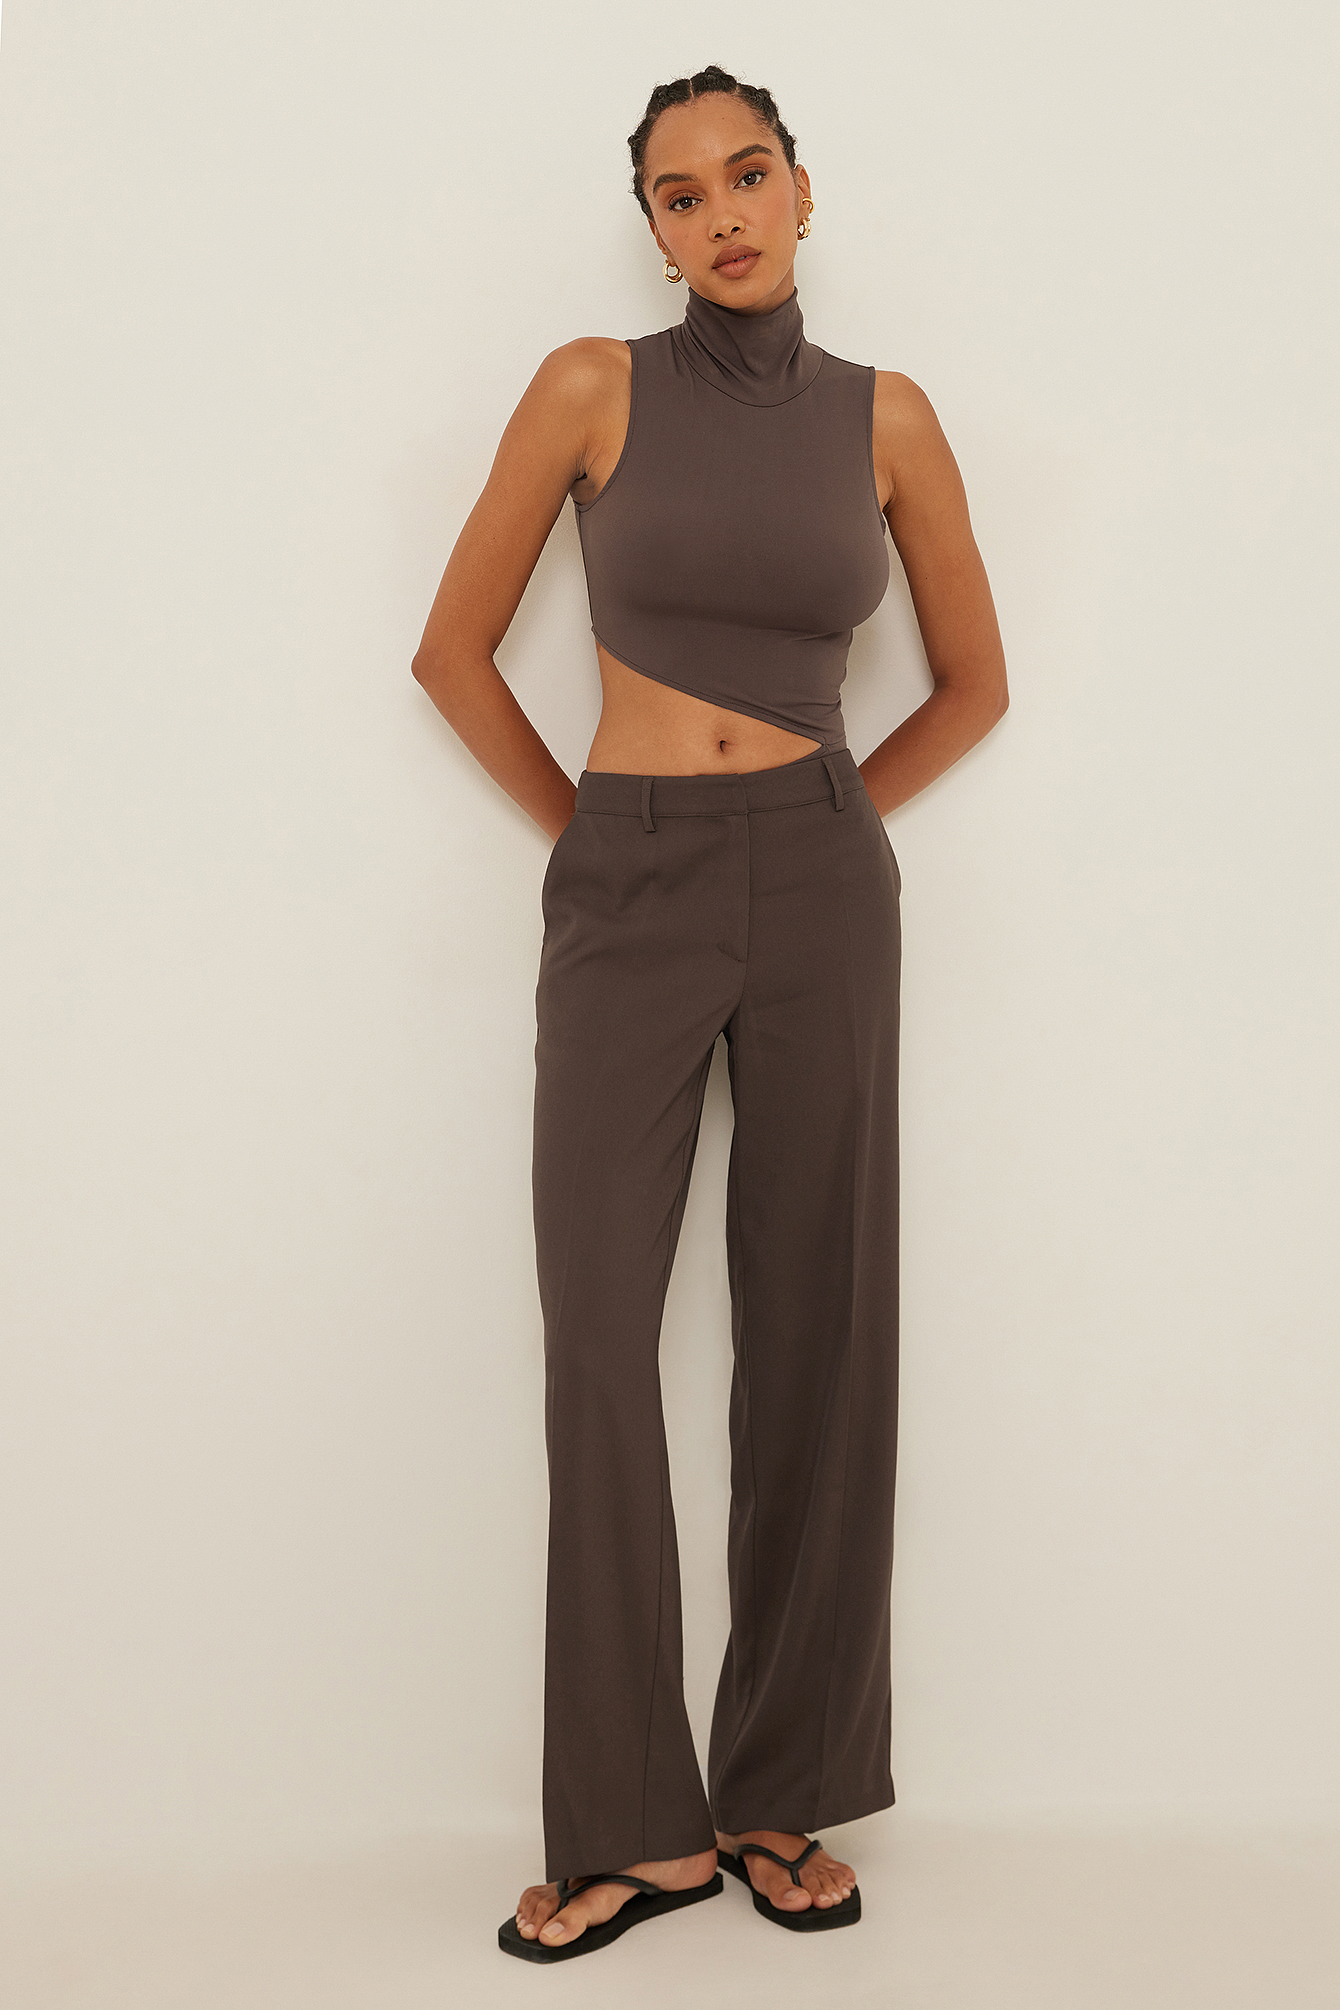 Polo Neck Cut Out Body Outfit.